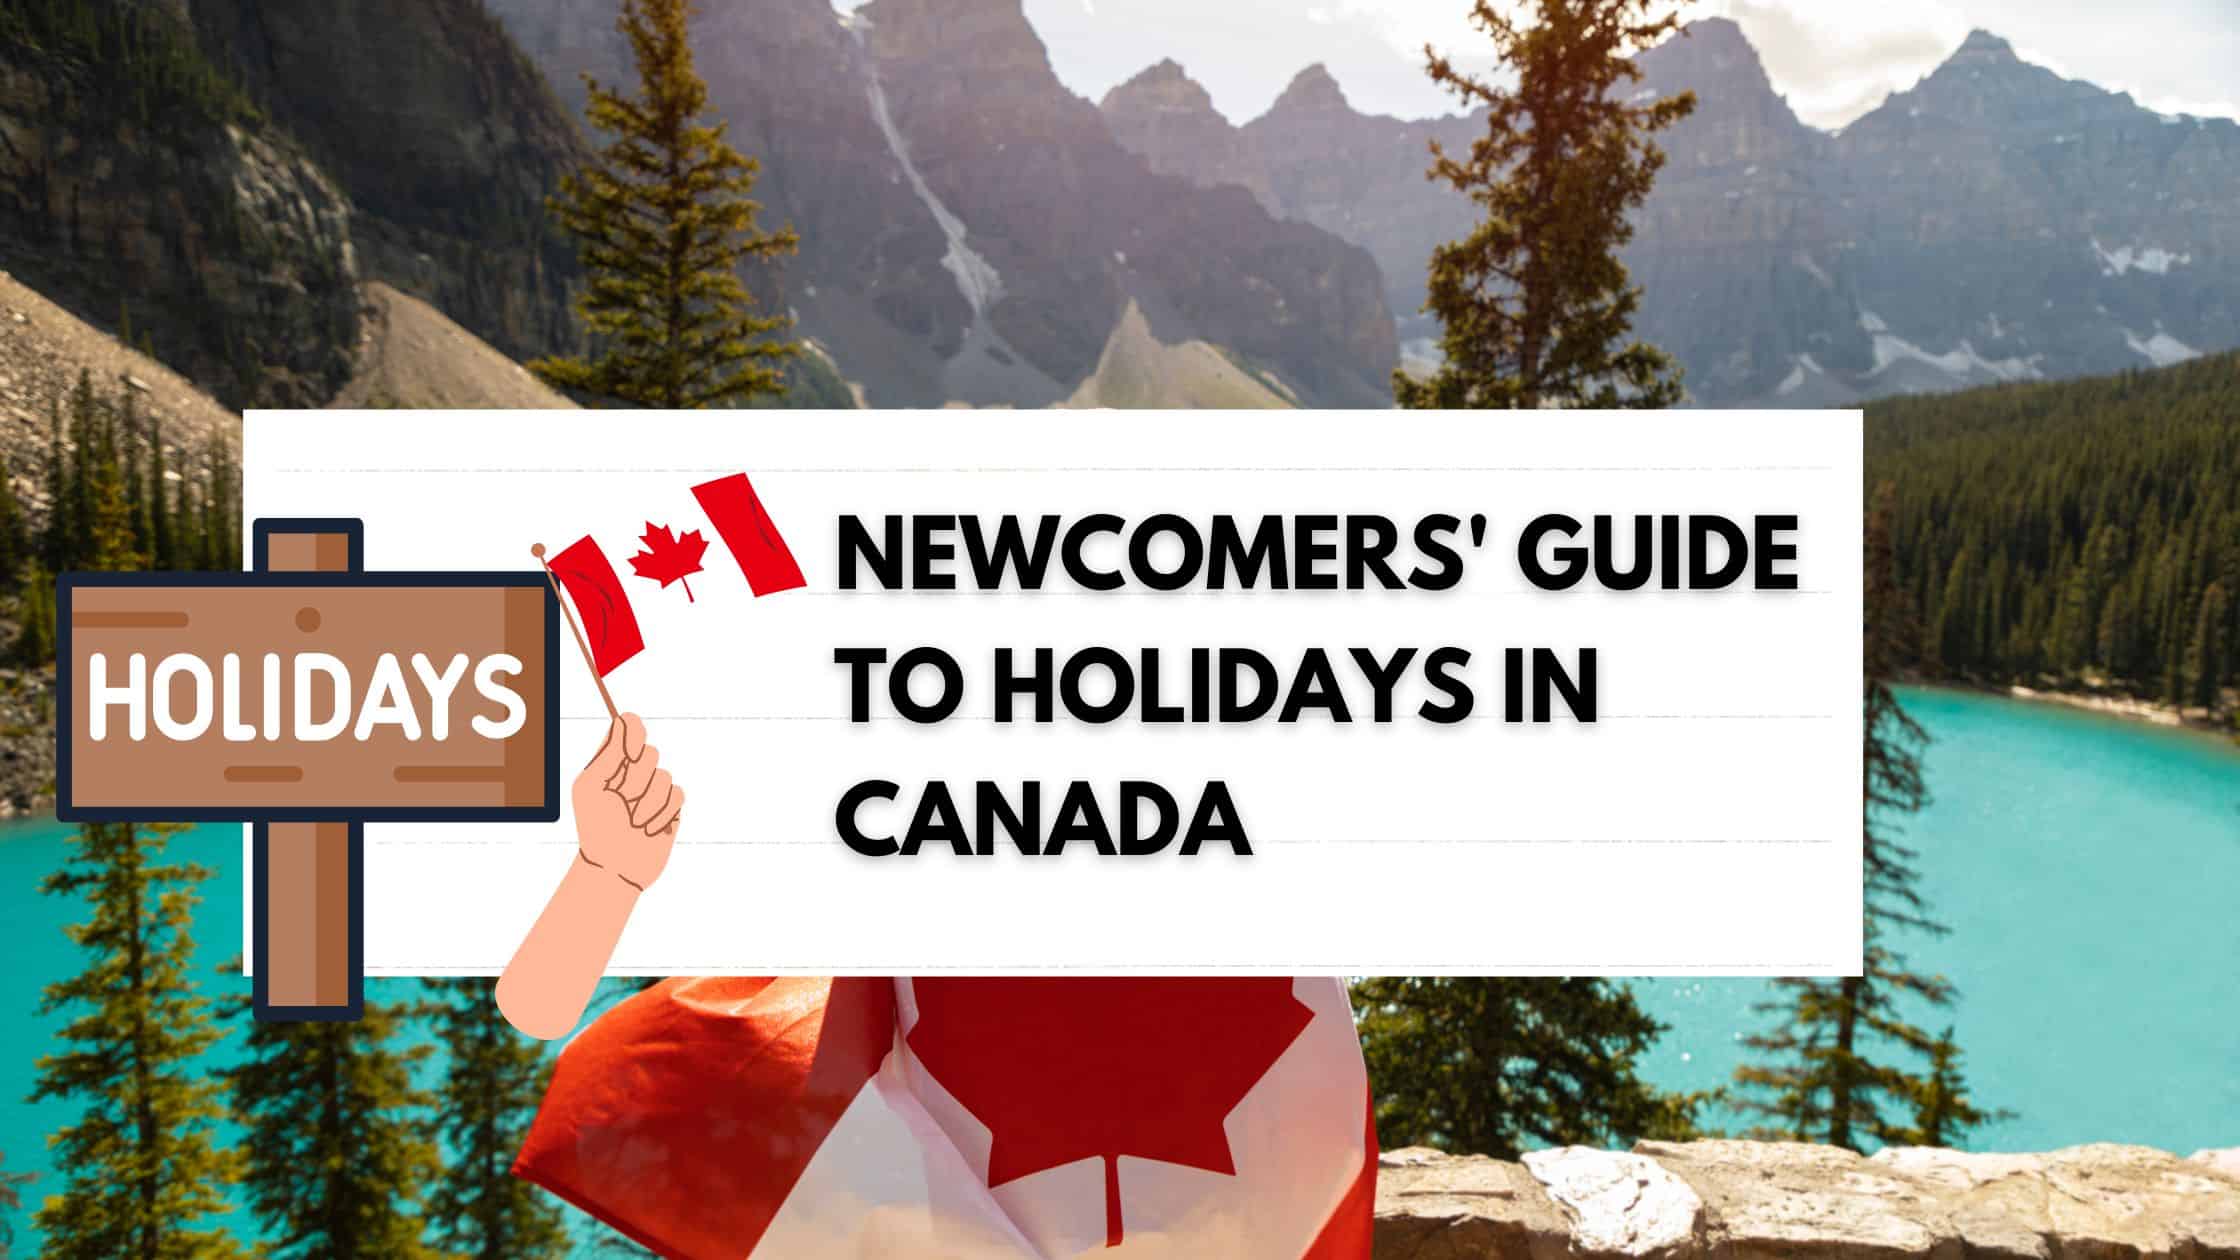 Newcomers' guide to holidays in Canada